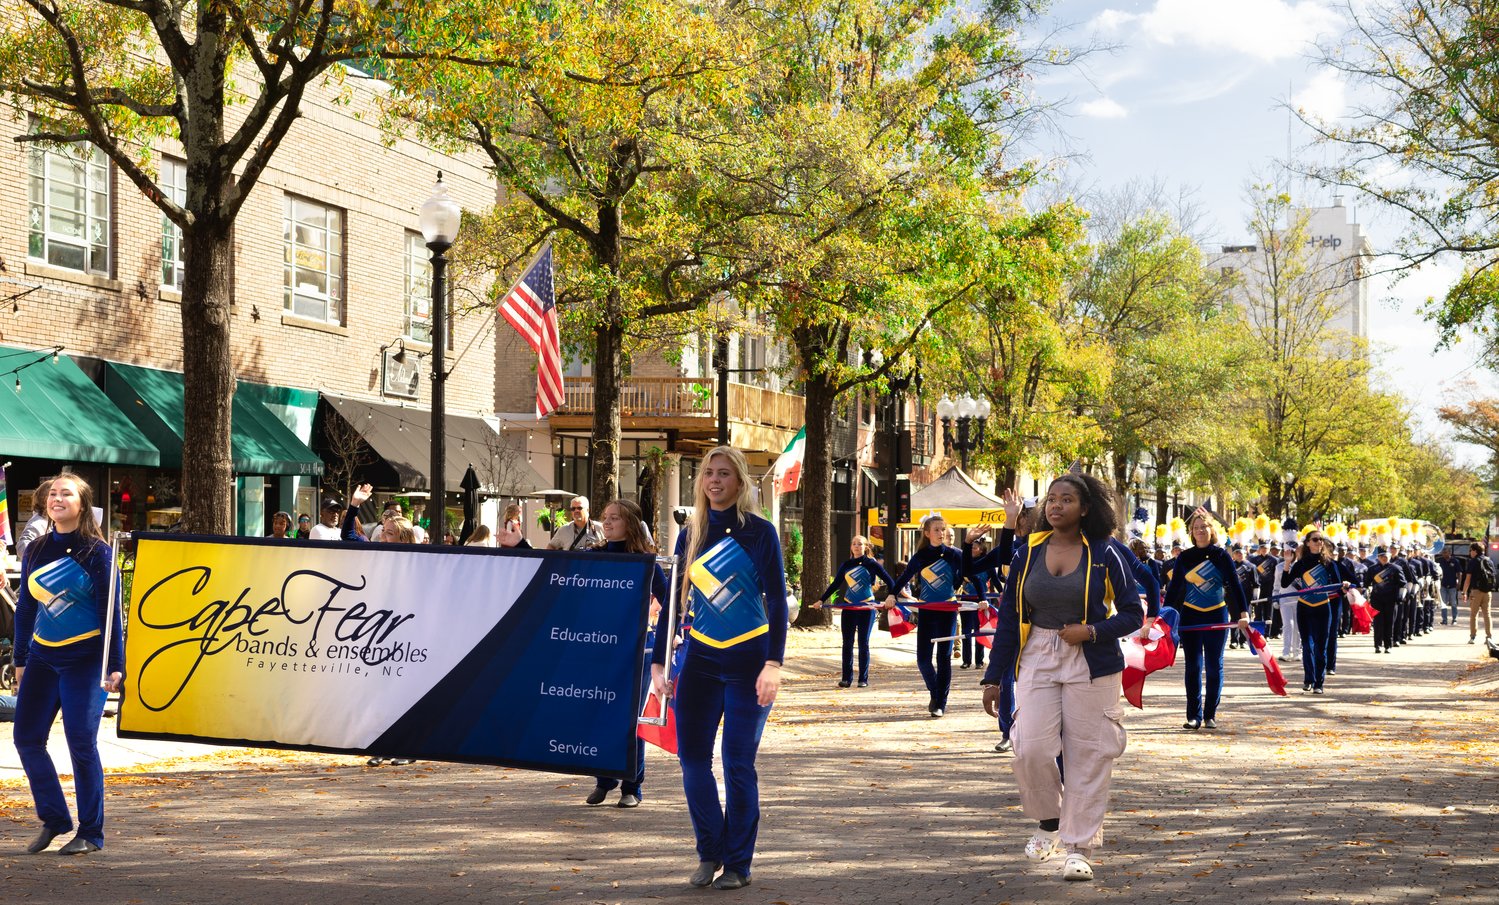 The Veterans Day Parade was held in downtown Fayetteville on Nov. 5.